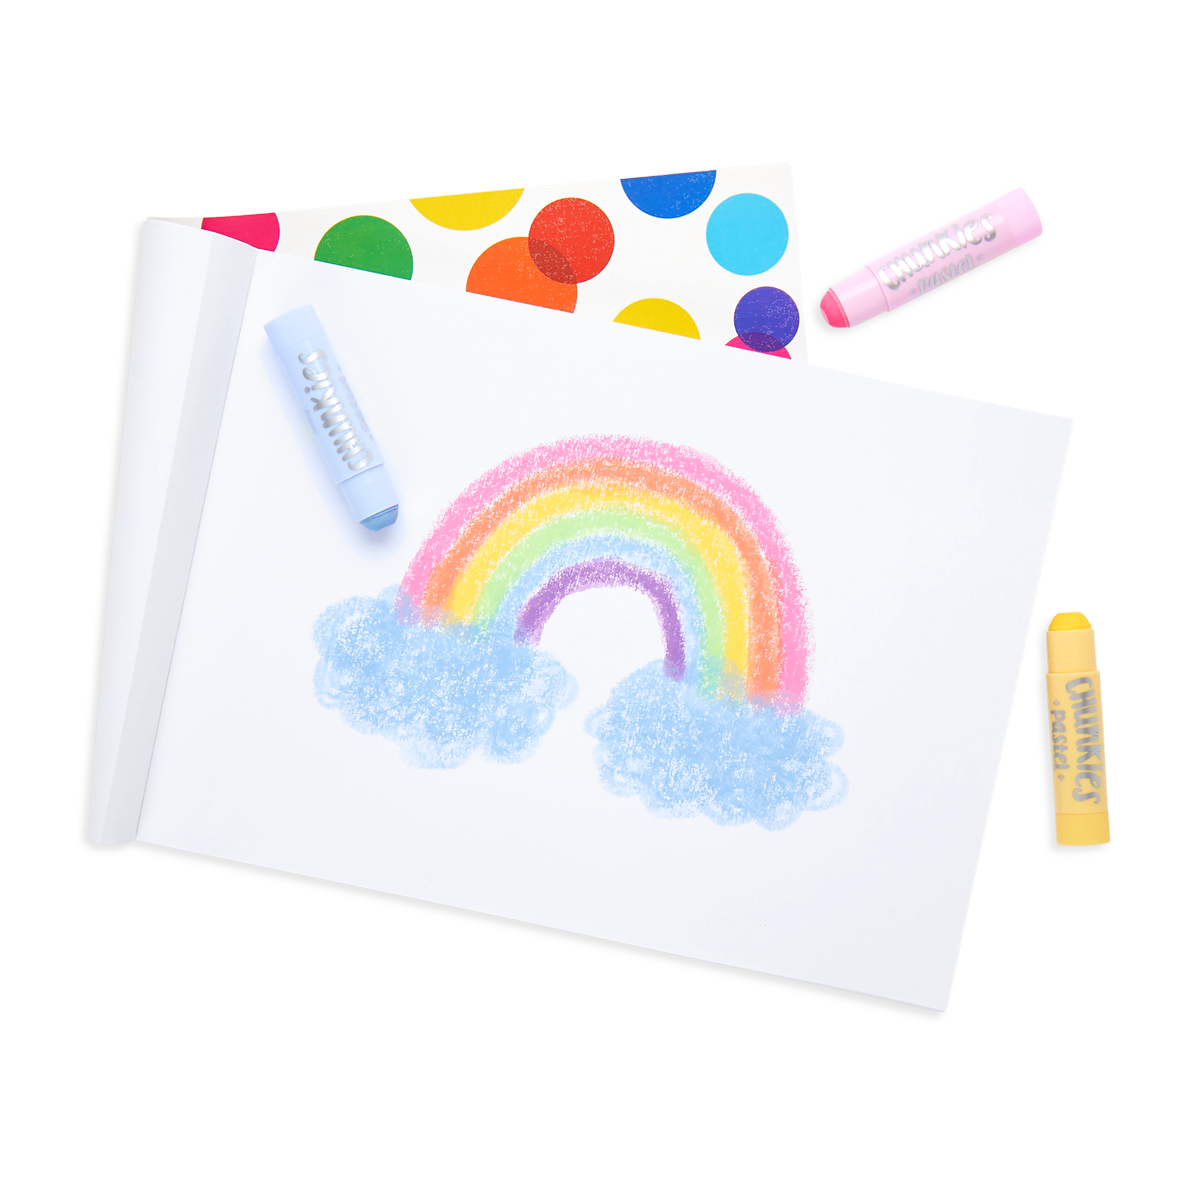 Sketchbook For Girls: Children's Drawing Pad. Drawing Paper For